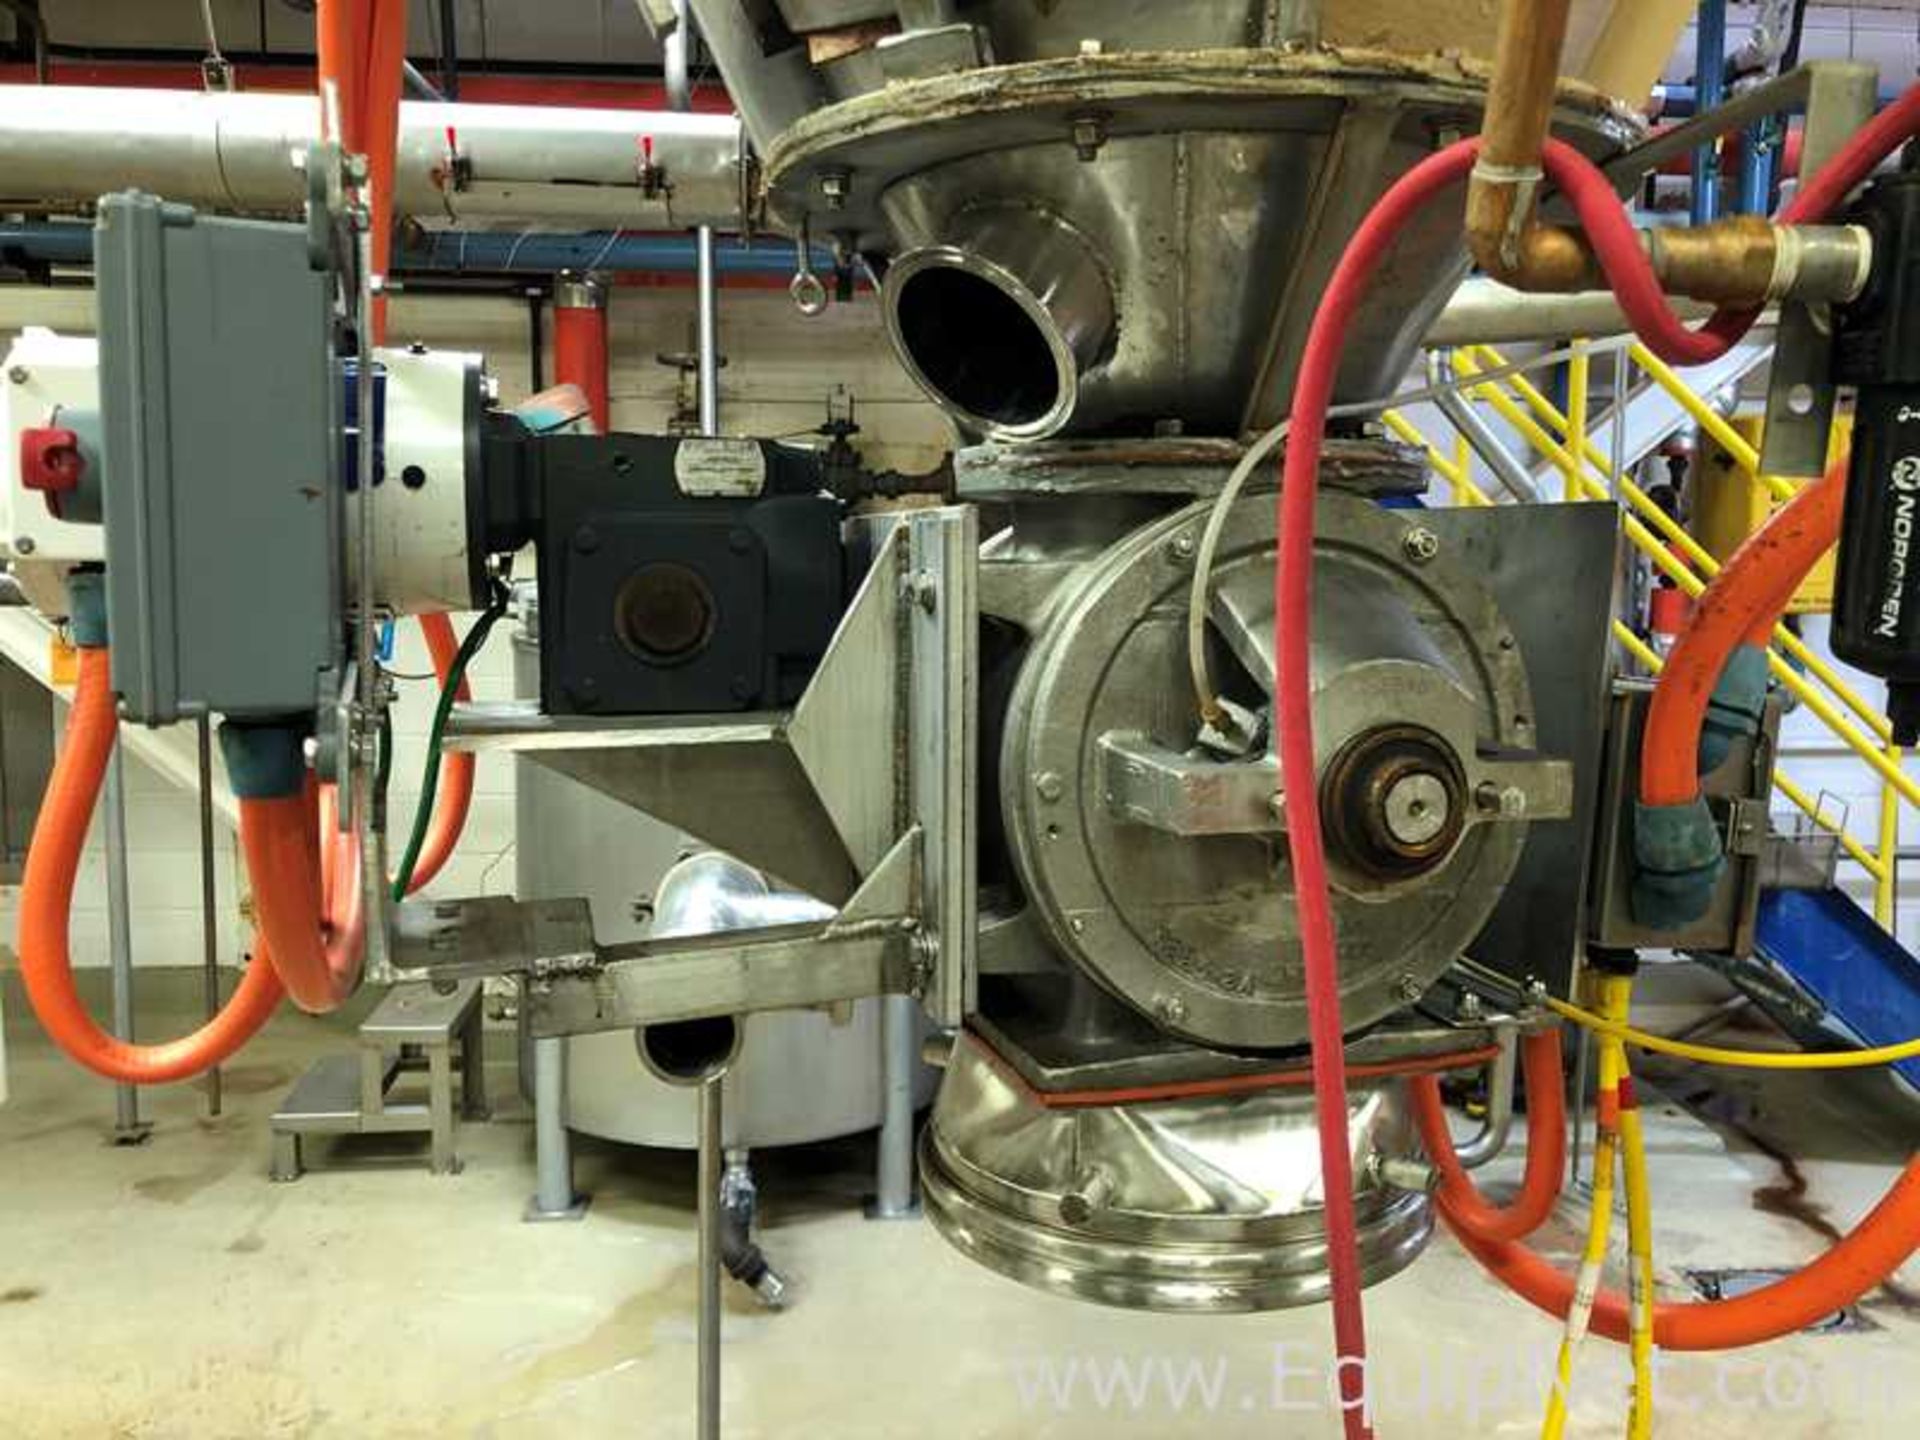 One Vacuum Conveyor System Vac-U-Max With Hopper And One Shick S-225-1 Rotary Valve - Image 10 of 14